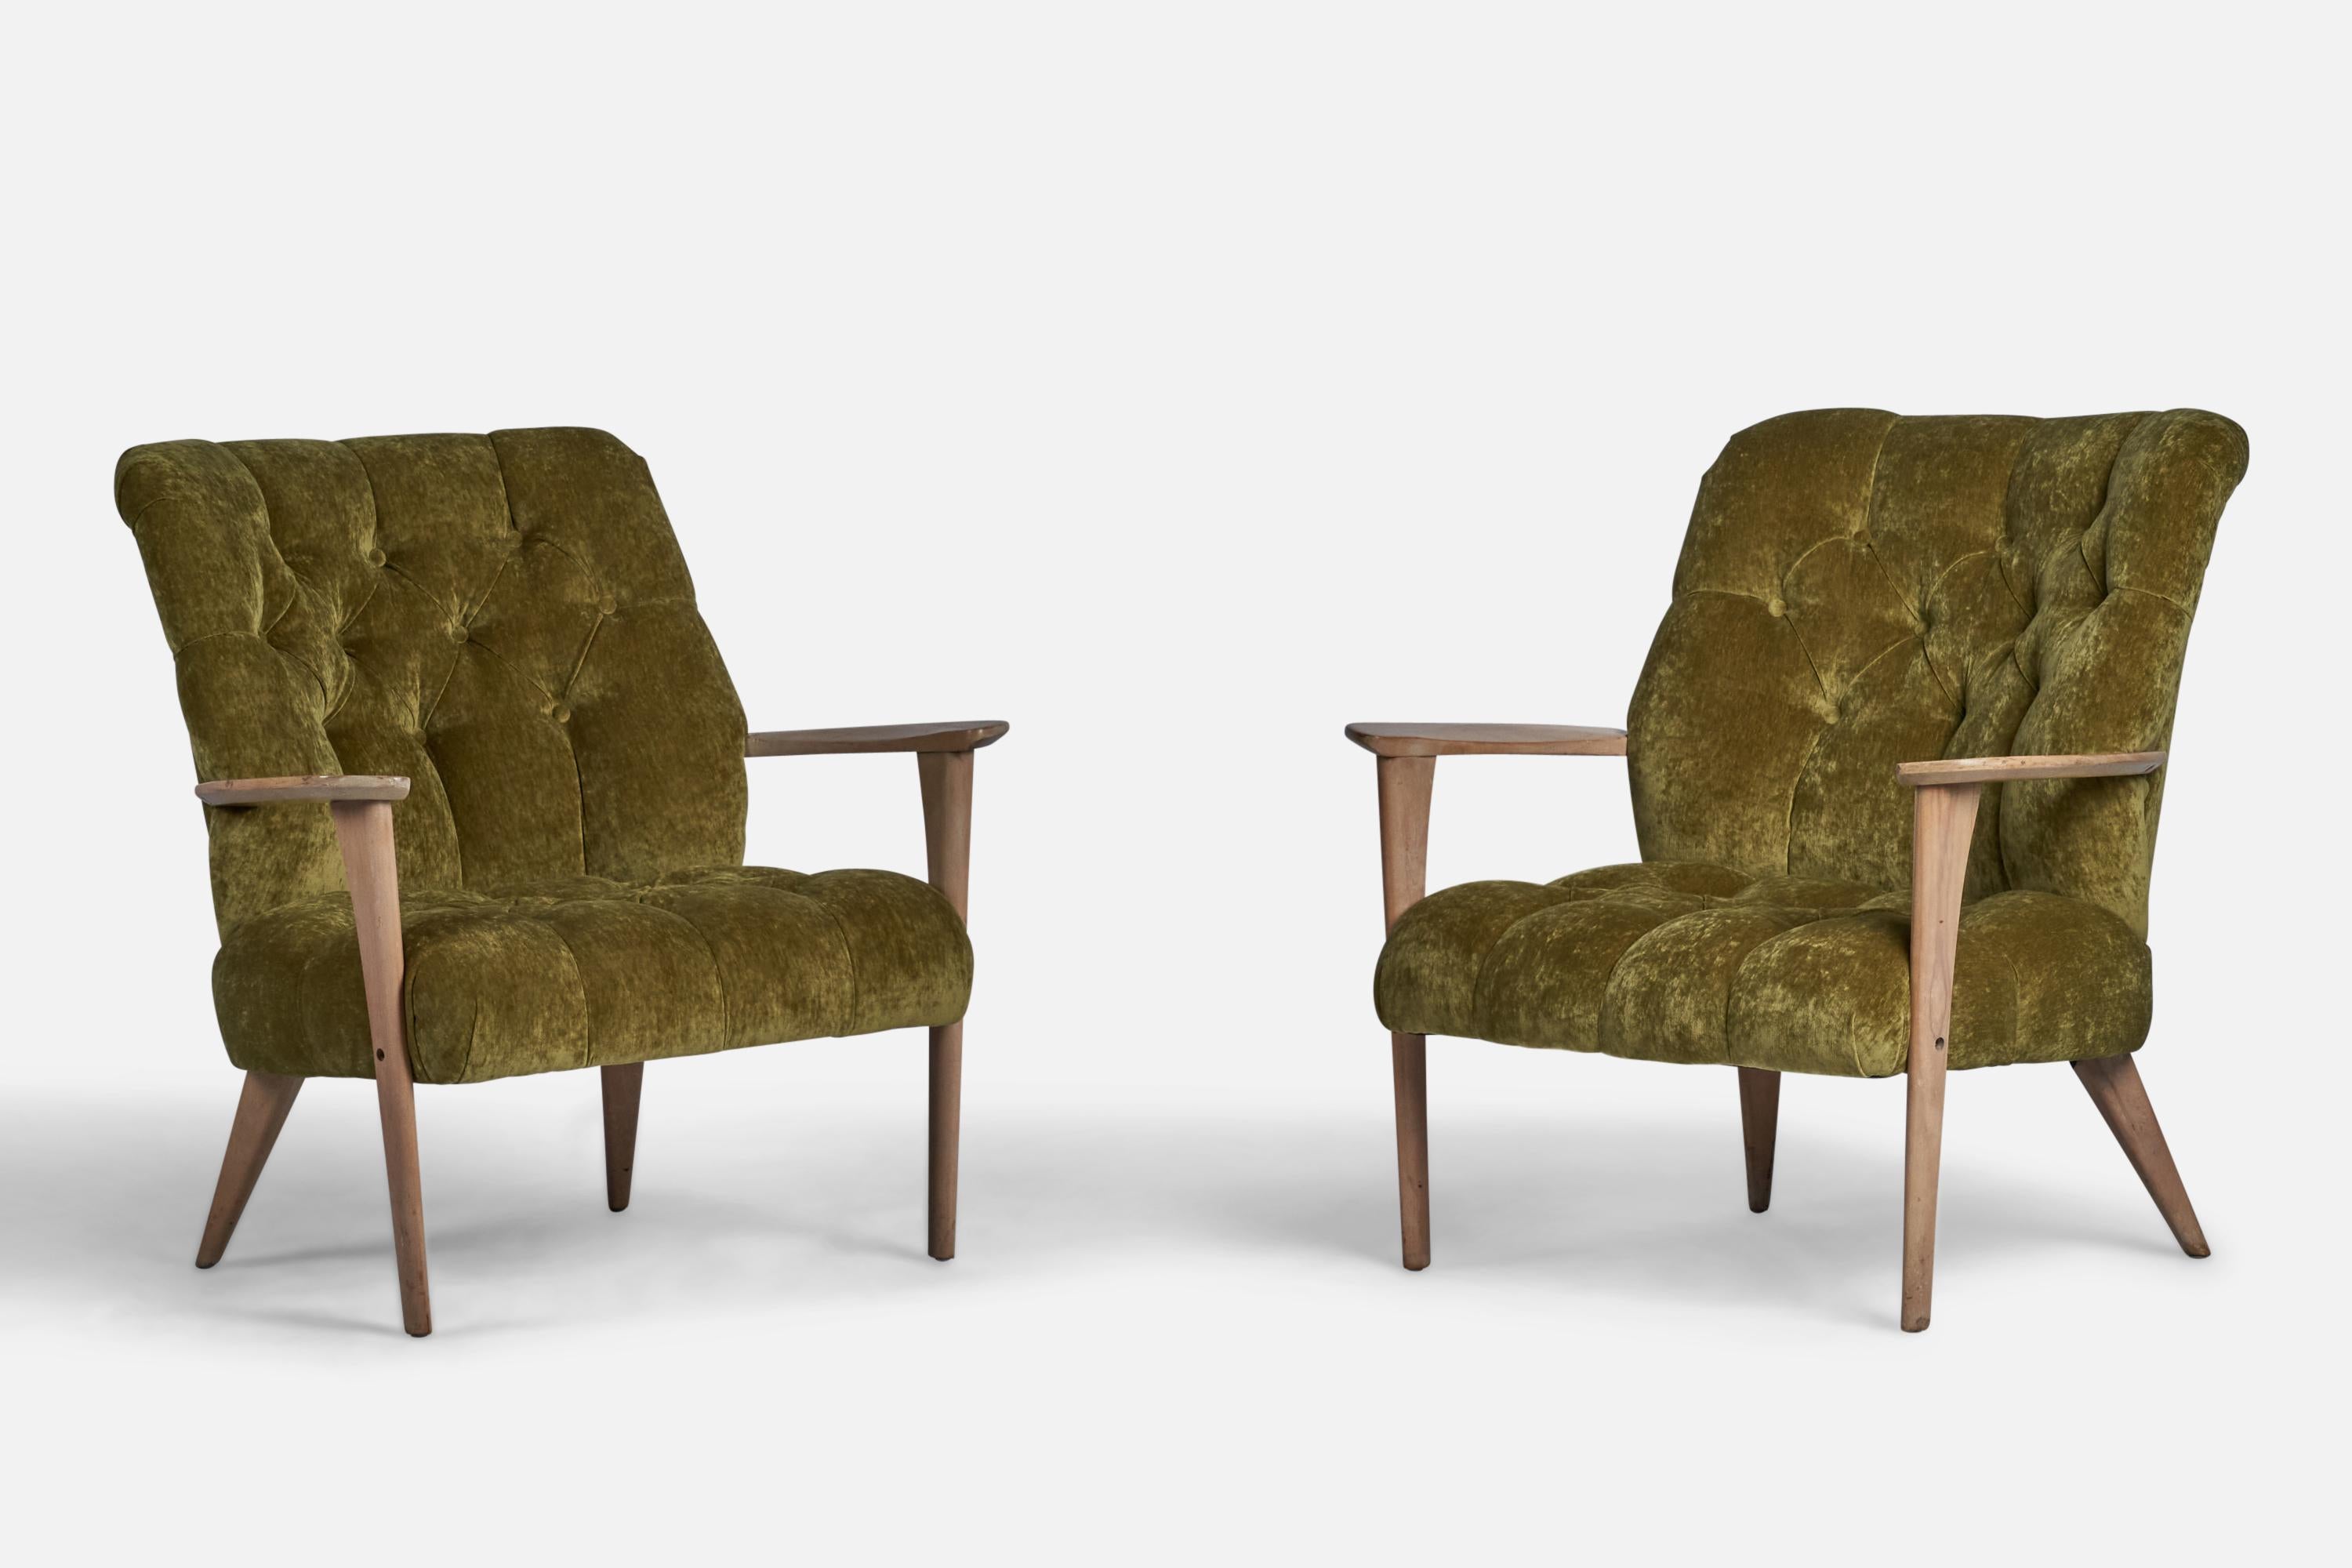 A pair of cerused oak and green velvet fabric lounge chairs designed and produced in the US, 1940s
Seat height: 14.85”